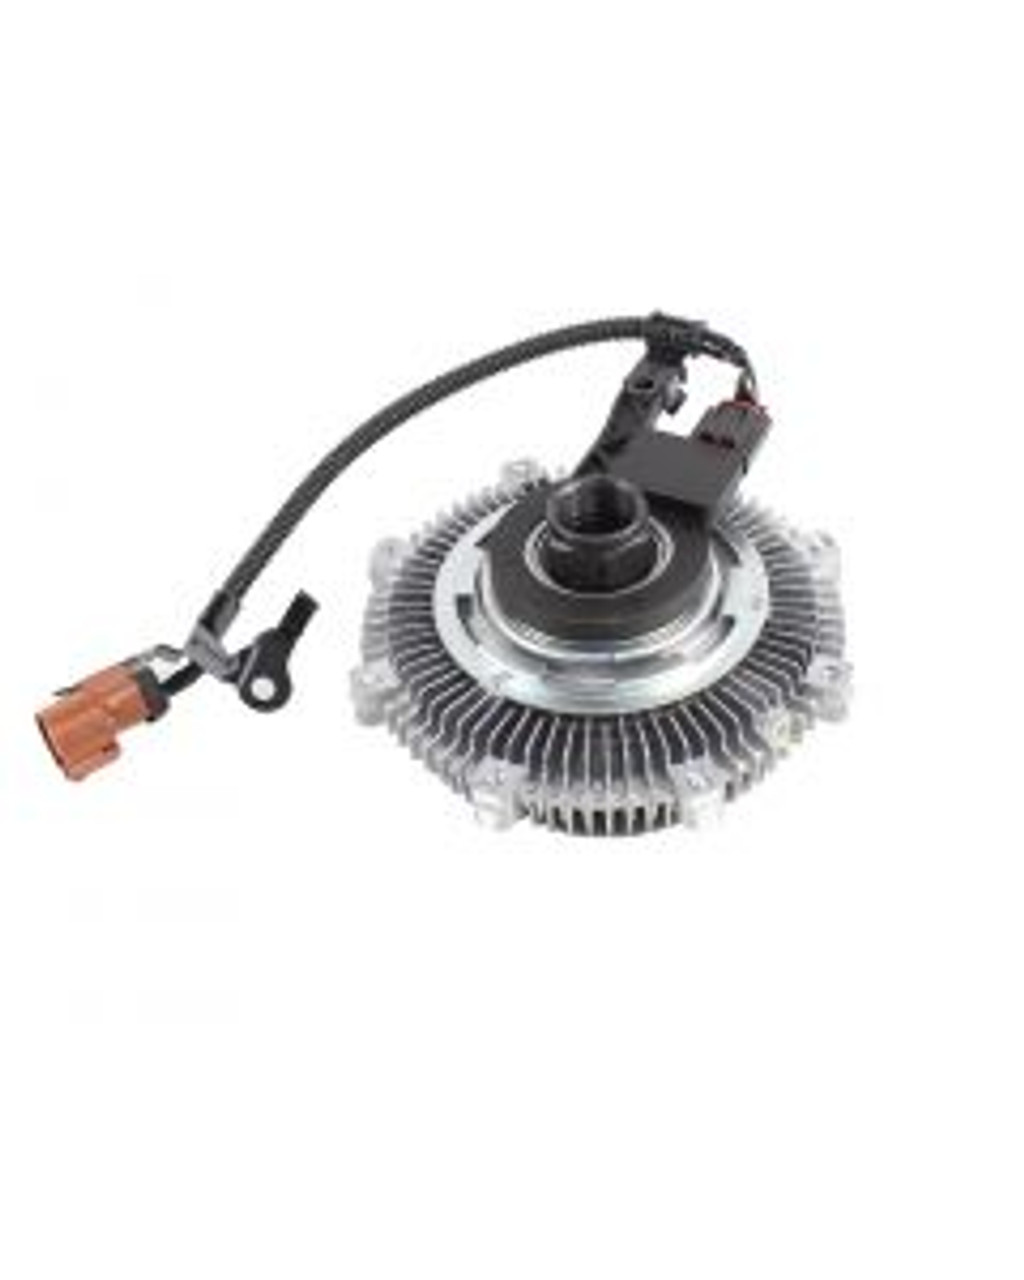 Fan Clutch 5.4L 2009 Ford Expedition - FCA1005E.1